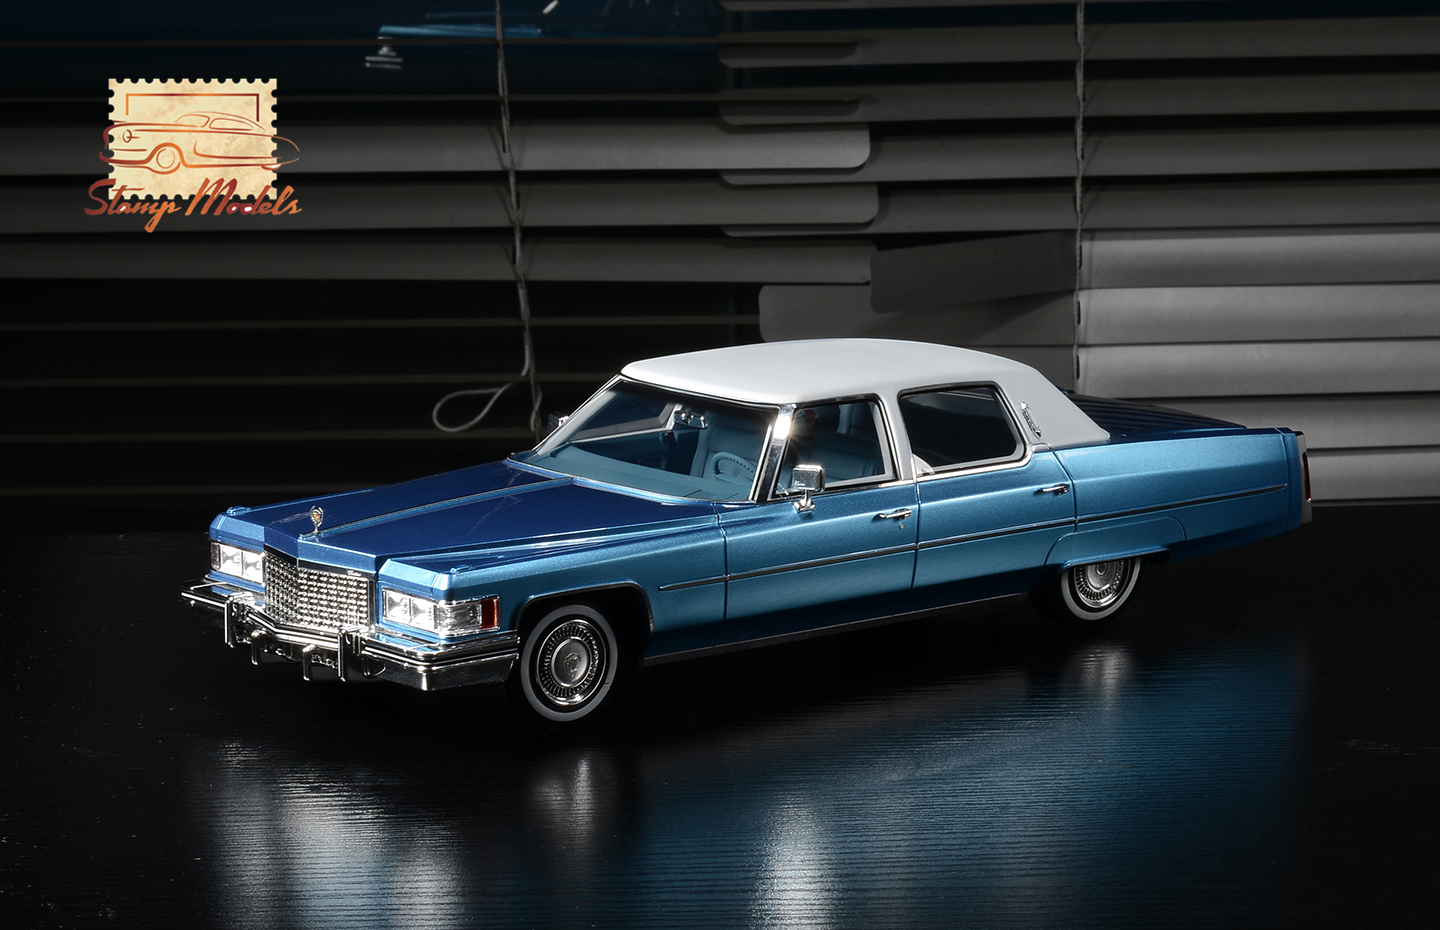 1/18 STM1976201 1976 Cadillac Fleetwood Sixty Special Brougham Crystal Blue